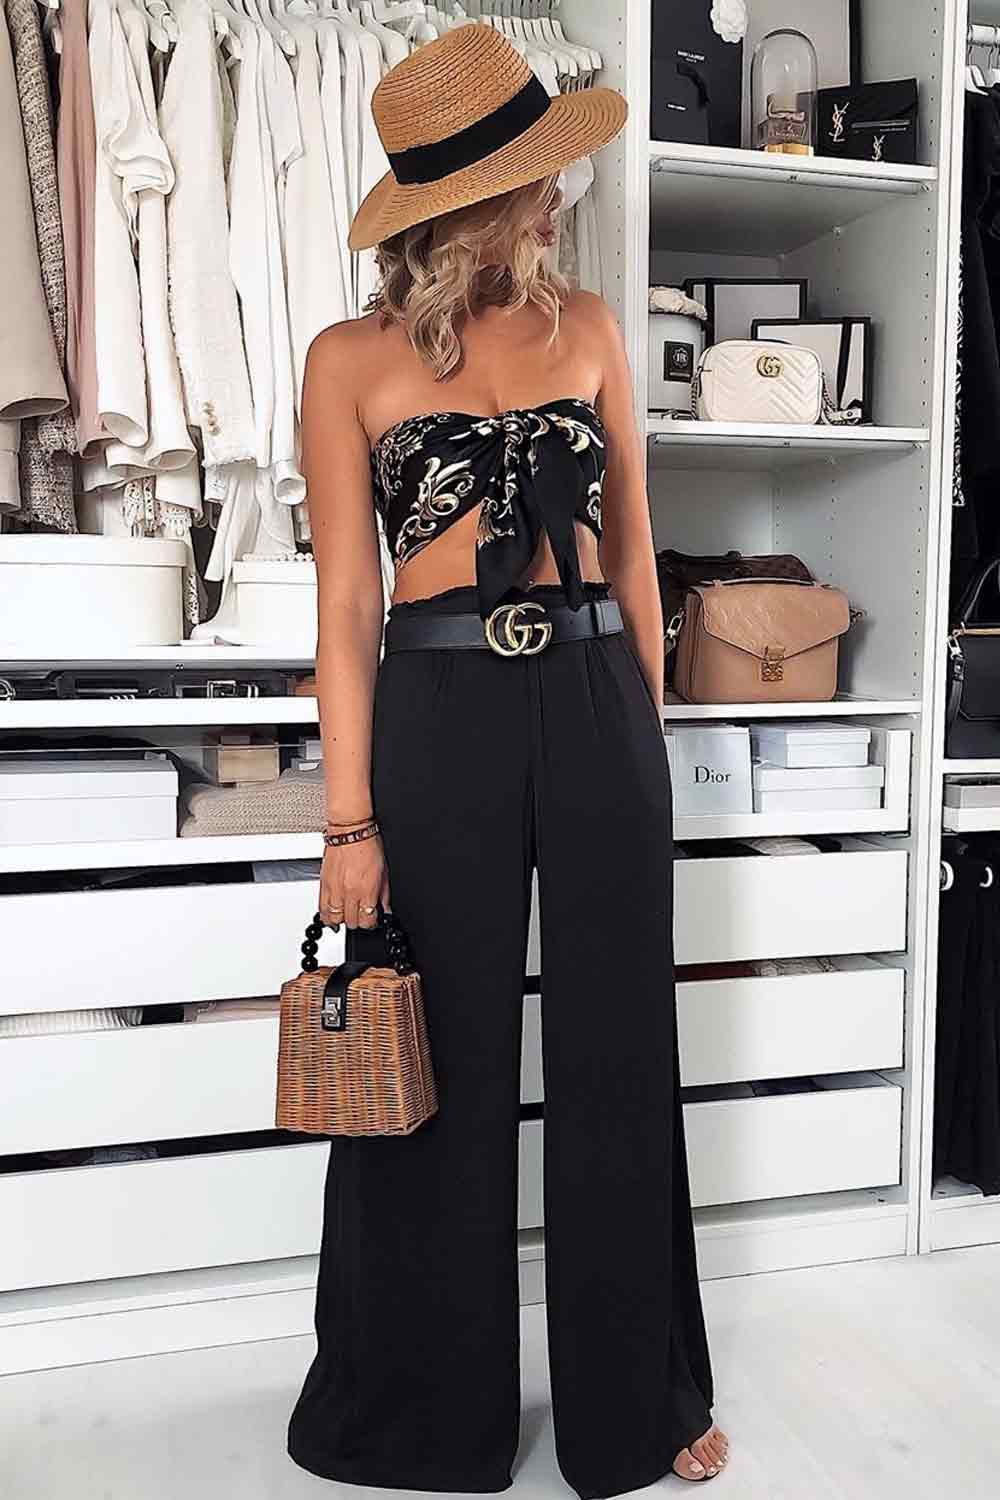 Fantastic Summer Outfits For All Tastes And Occasions | Glaminati.com